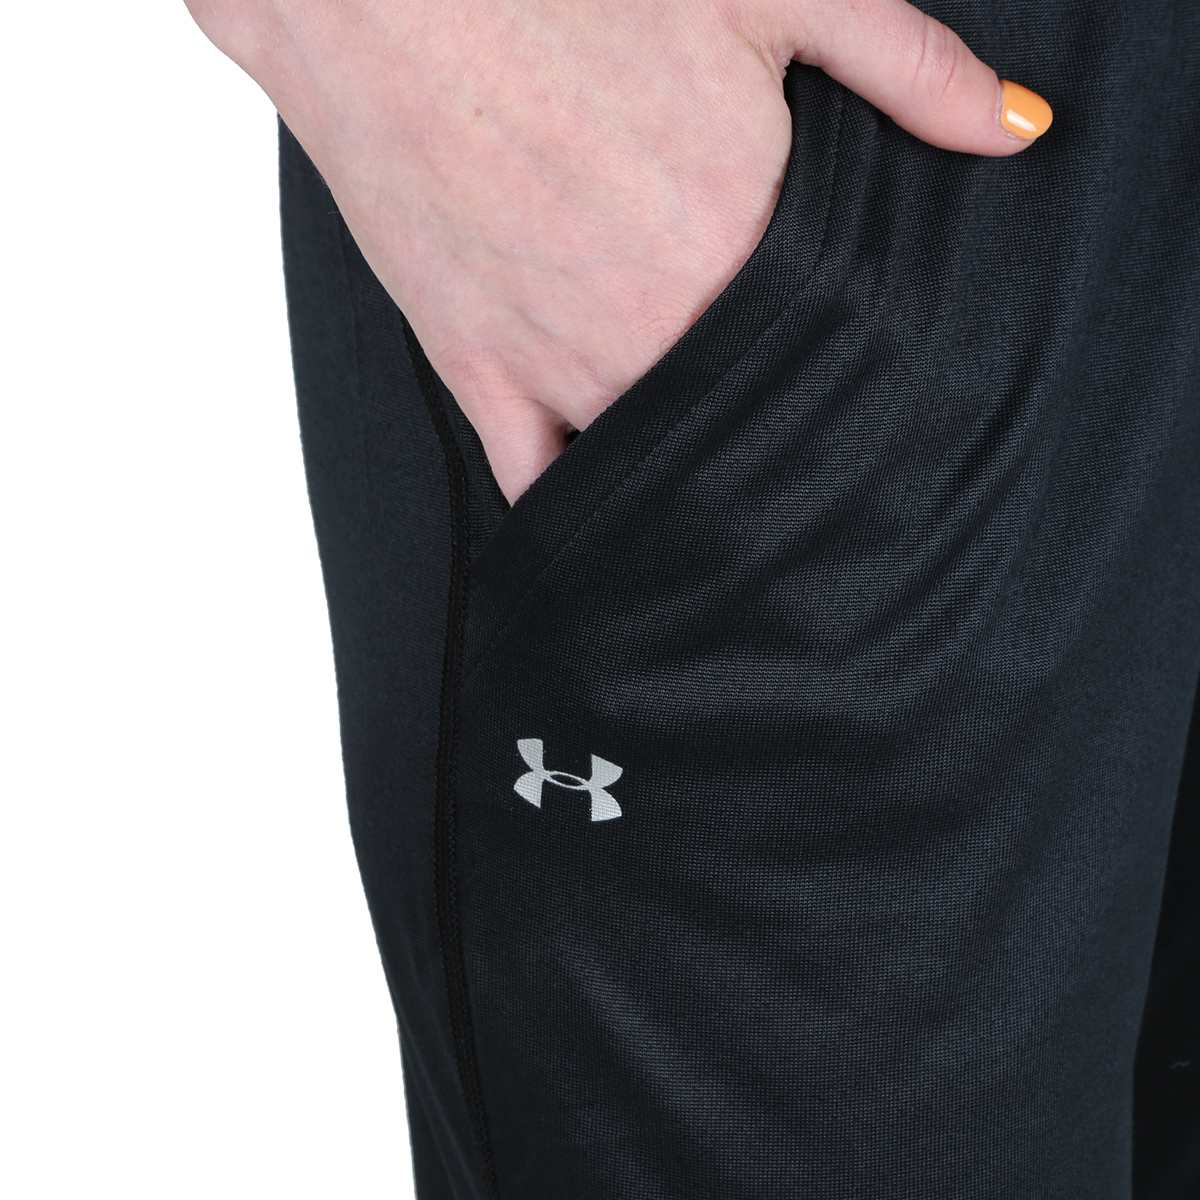 Pantalon Under Armour Tech 2.0,  image number null